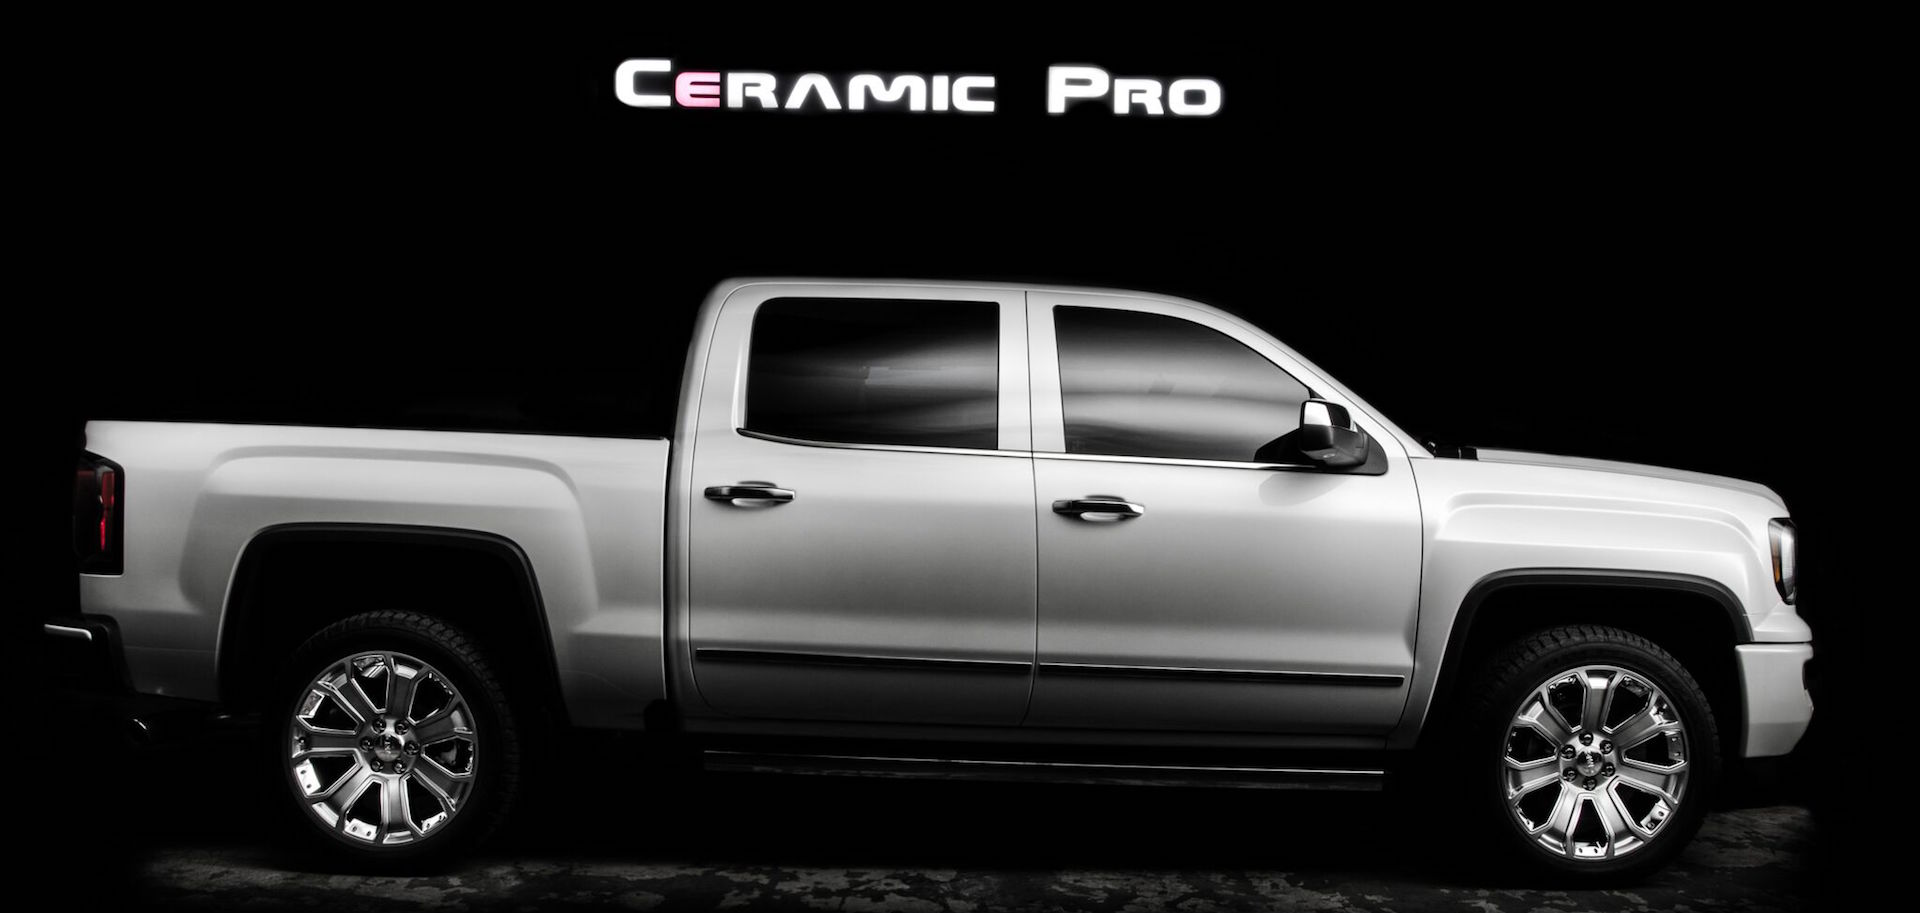 Ceramic Pro Serious Protection For Serious Cars